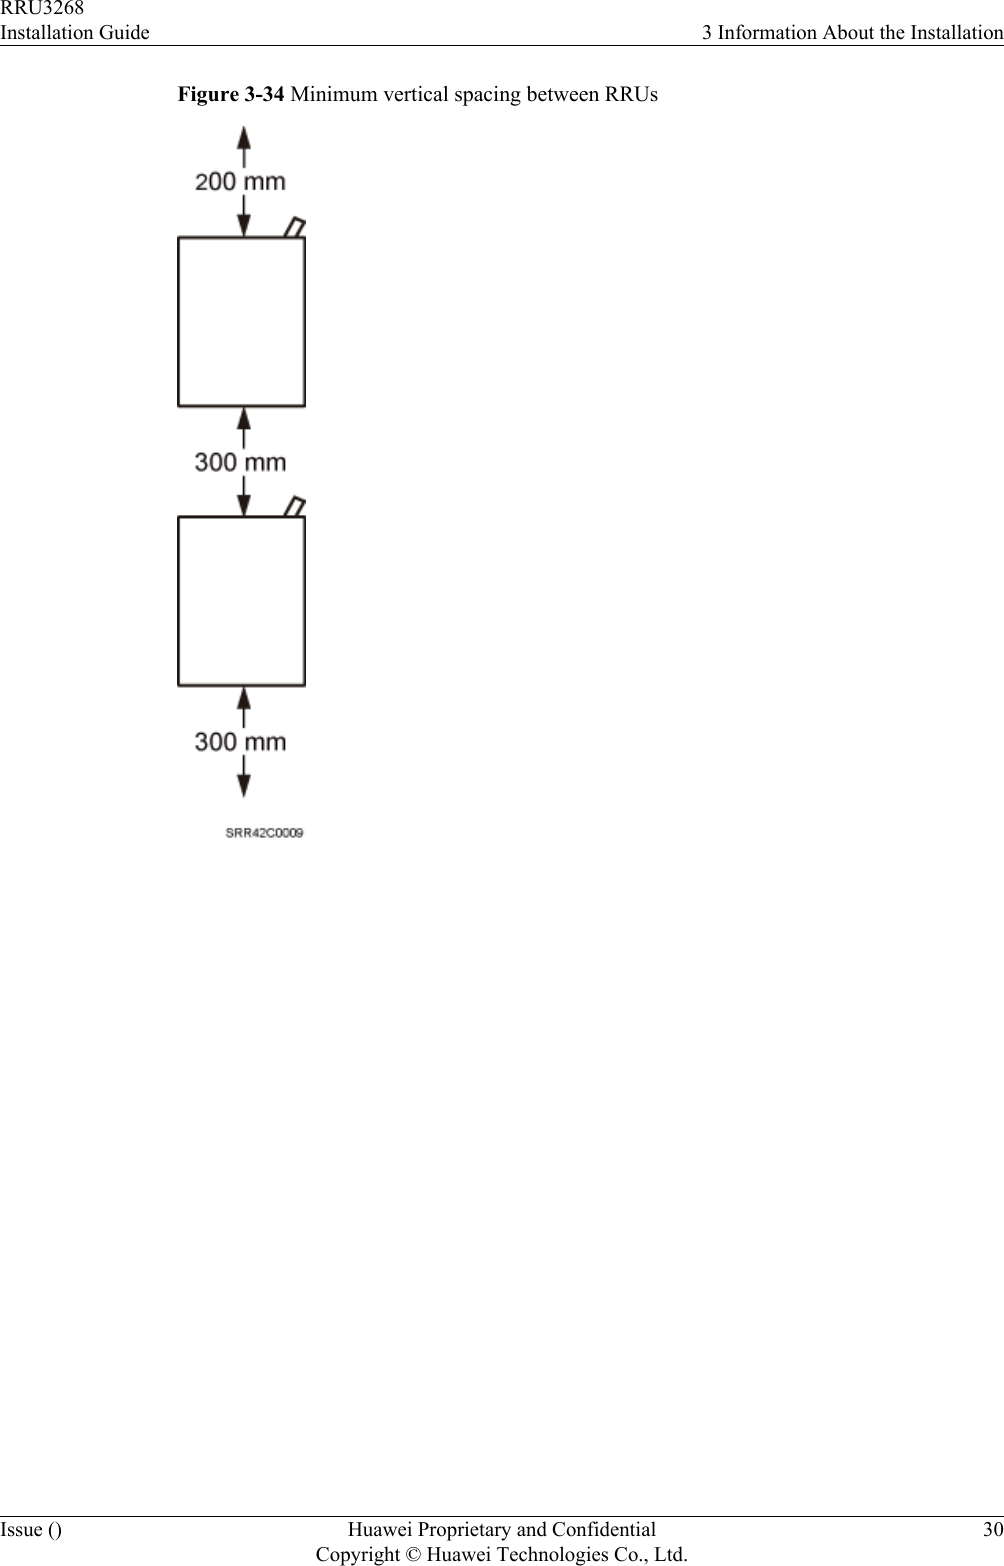 Figure 3-34 Minimum vertical spacing between RRUsRRU3268Installation Guide 3 Information About the InstallationIssue () Huawei Proprietary and ConfidentialCopyright © Huawei Technologies Co., Ltd.30